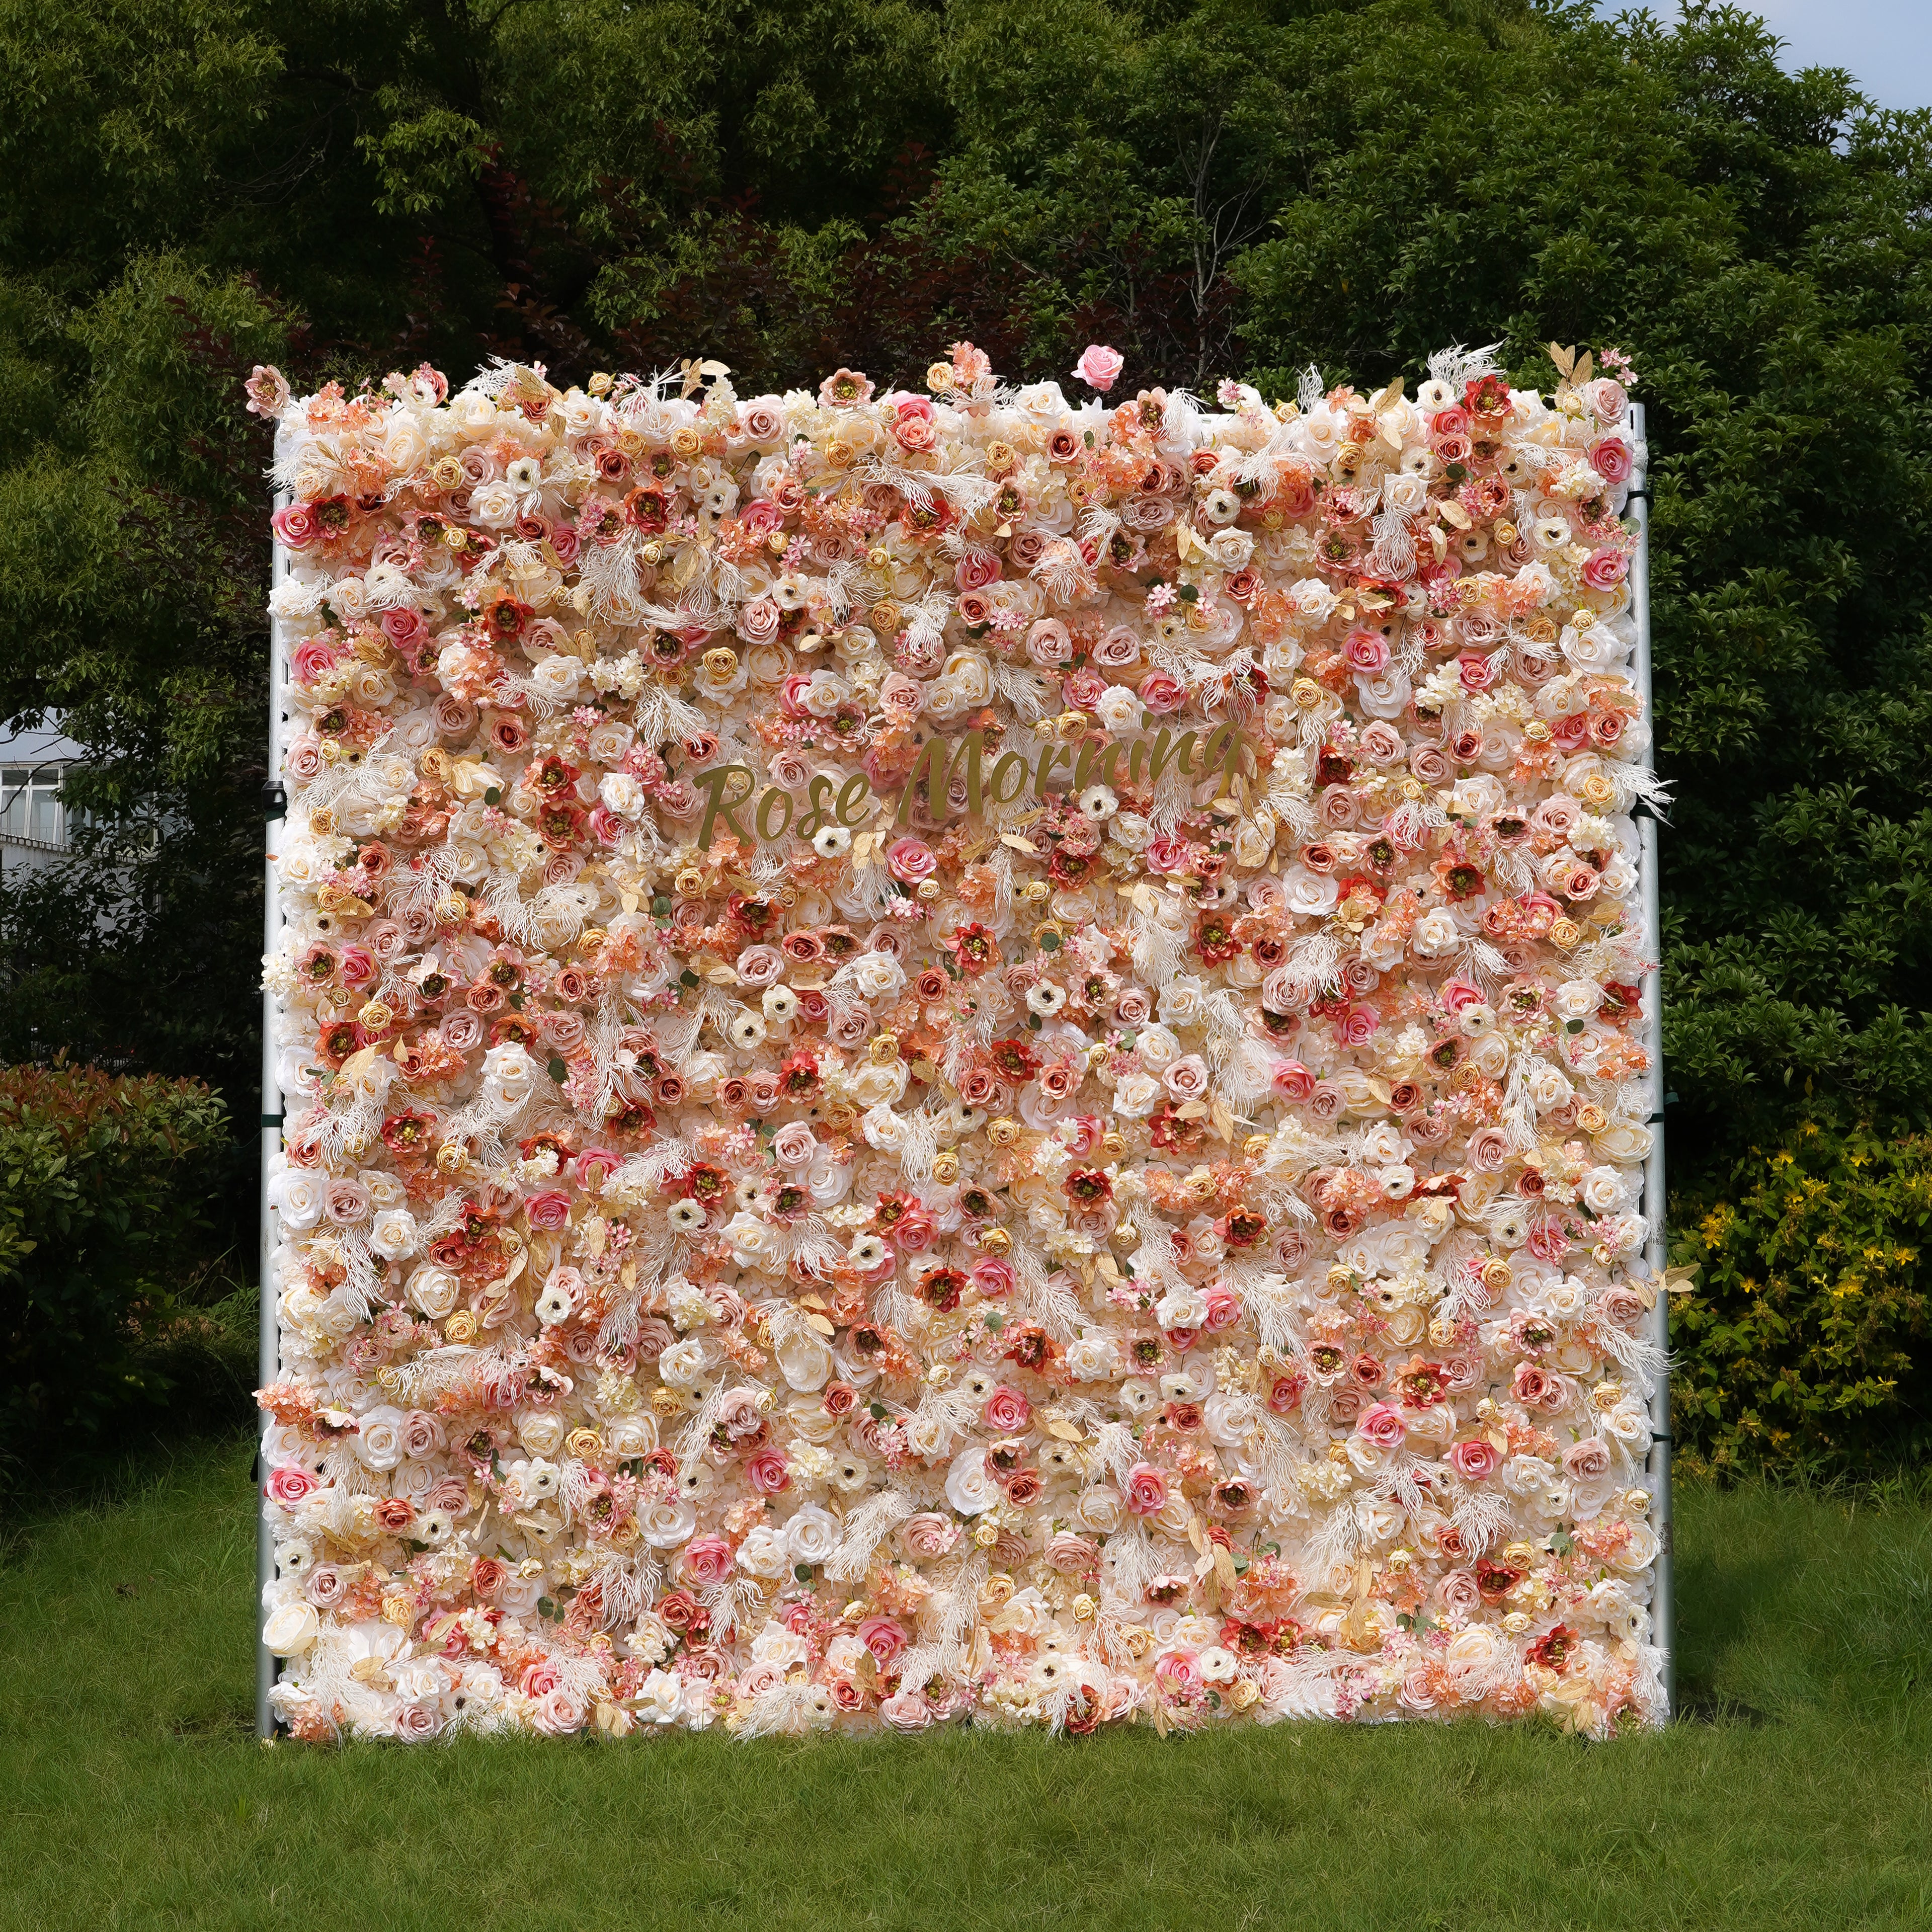 Rose Morning¡°The flower walls are made of artificial flowers in various colors, layered at different levels to create a lush, elegant and natural look. The exclusive zipper design and roll-up design make it easy to install and remove.¡±